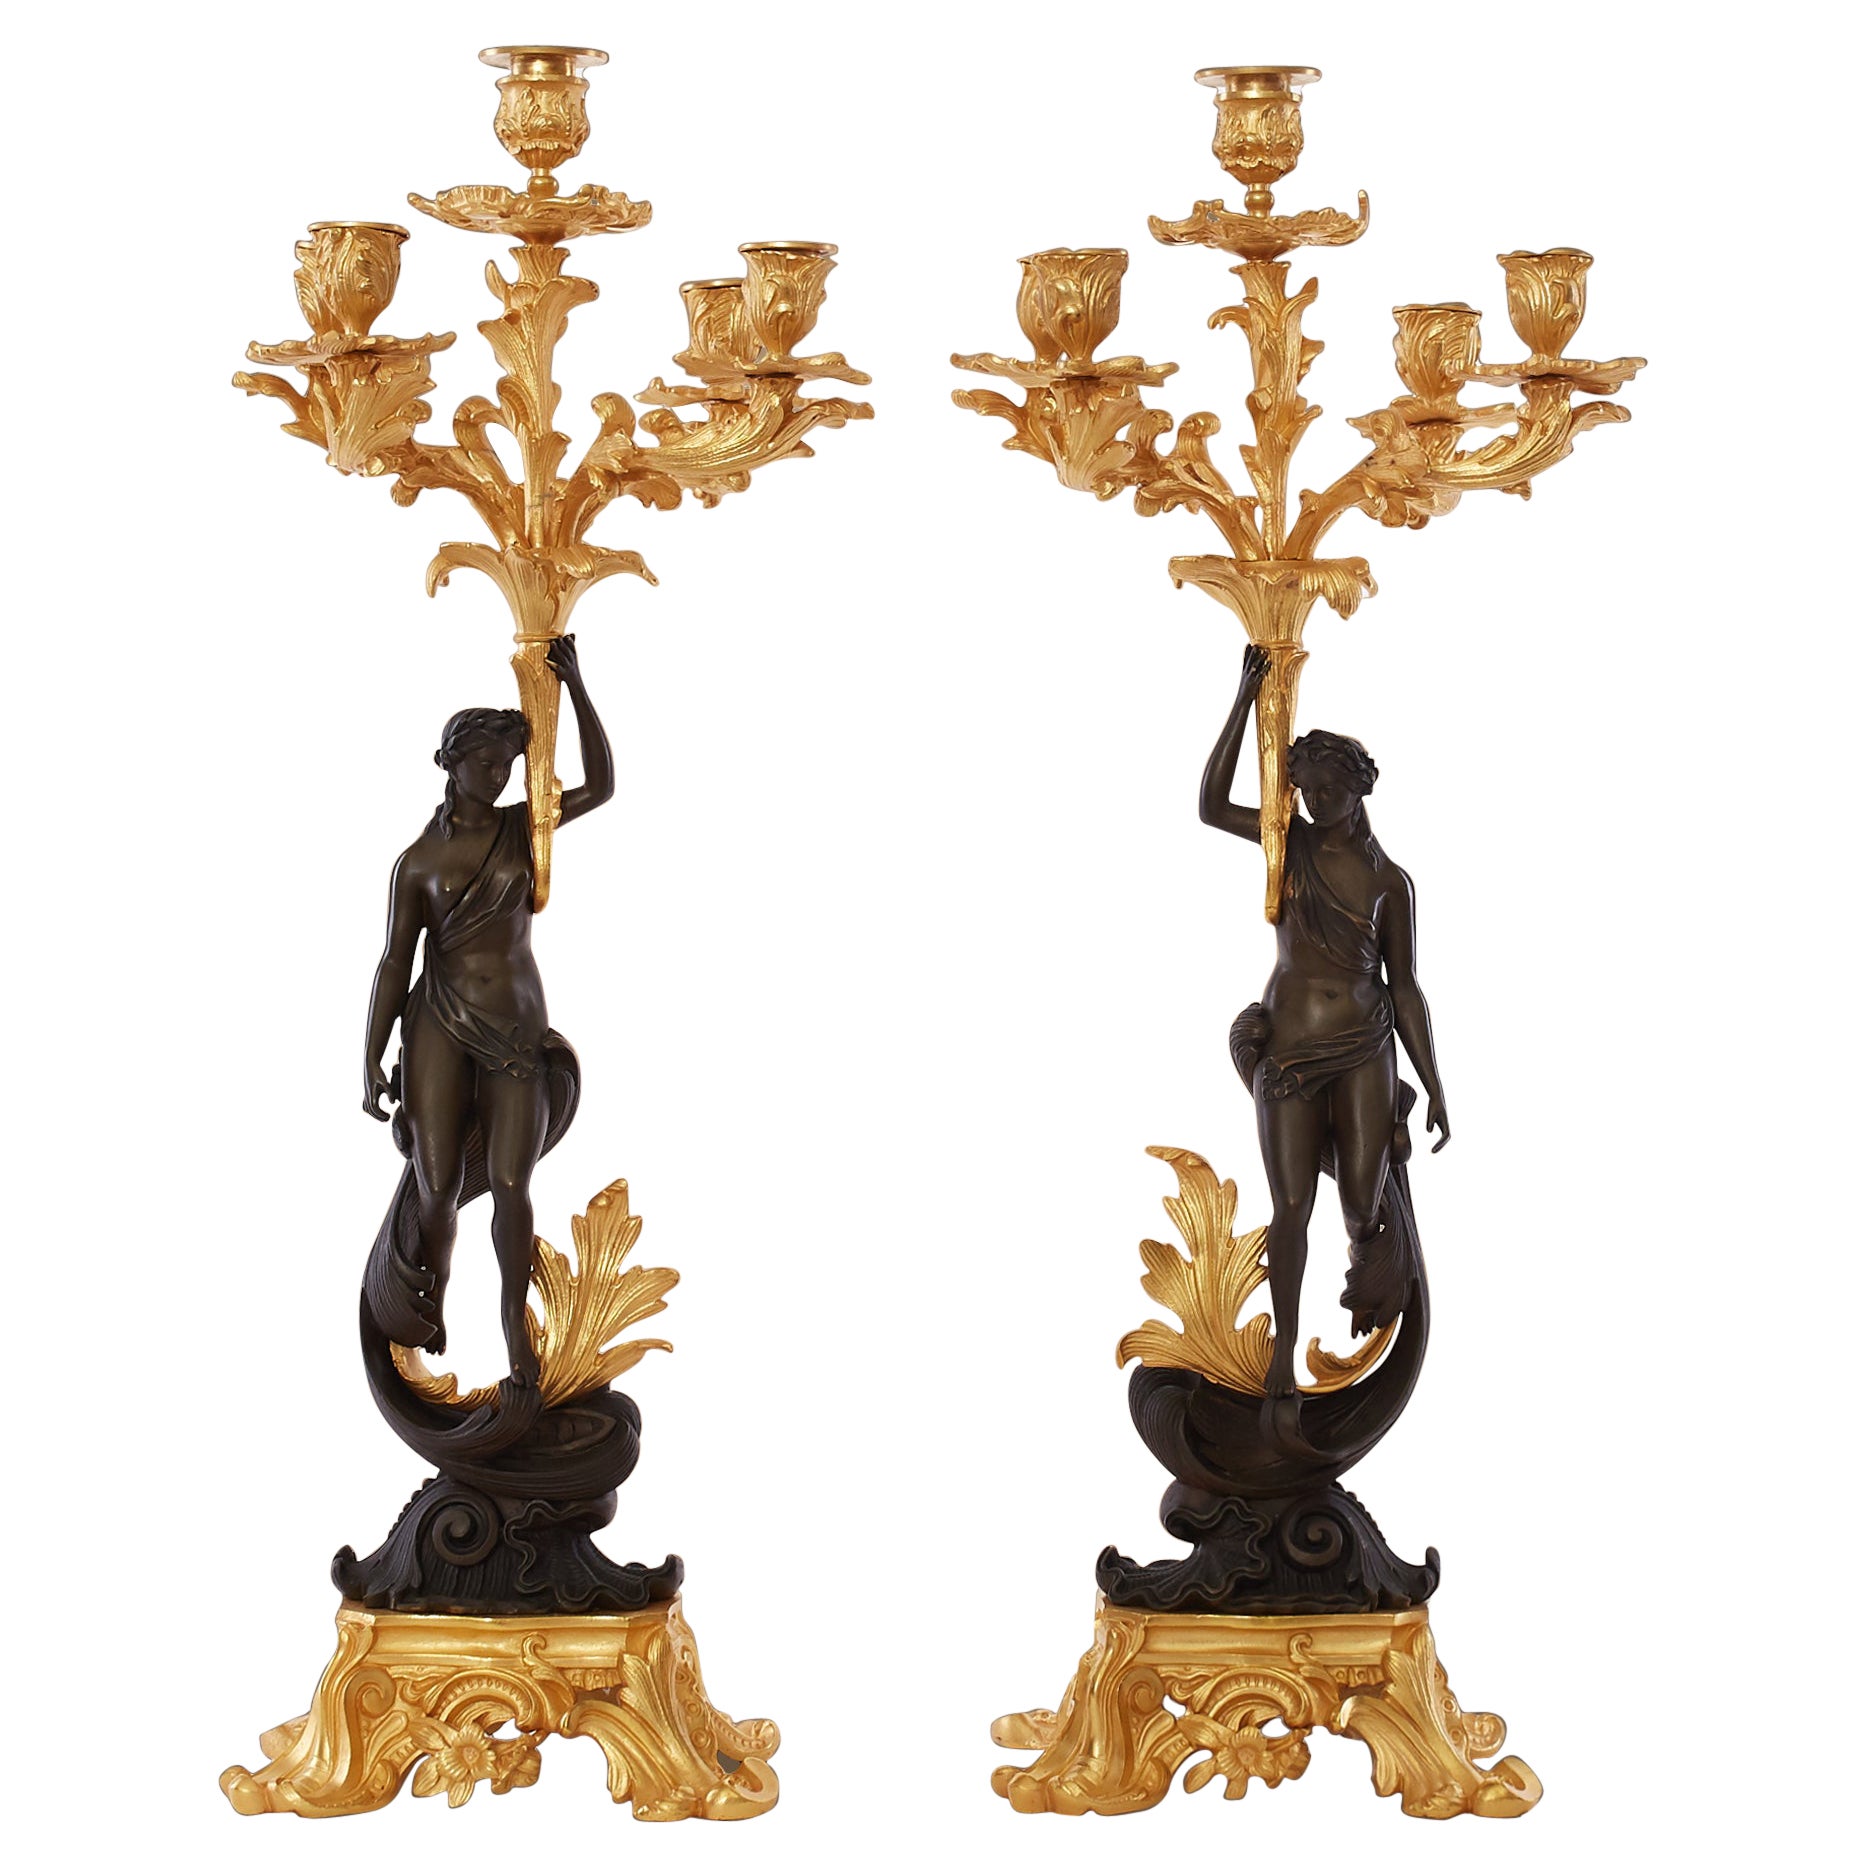 These Are a Pair of Gilded or Enameled Perforated Brass Candlesticks For Sale